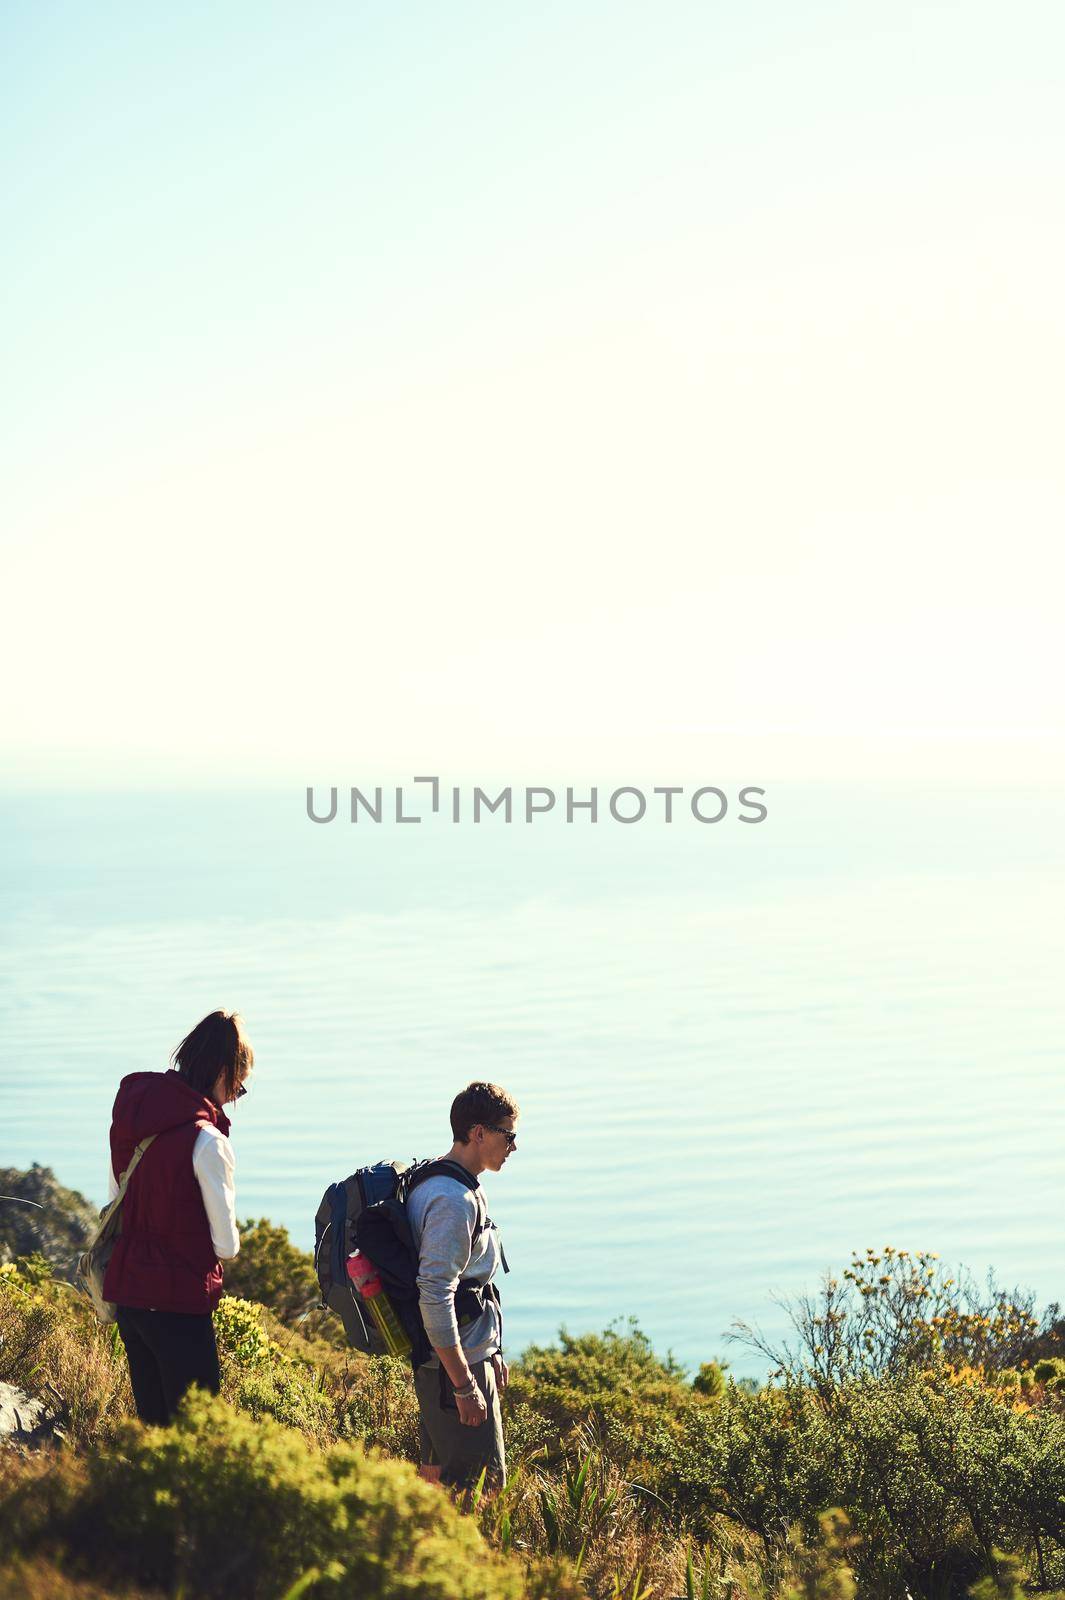 Shot of a young couple exploring the outdoors on a hiking trail.